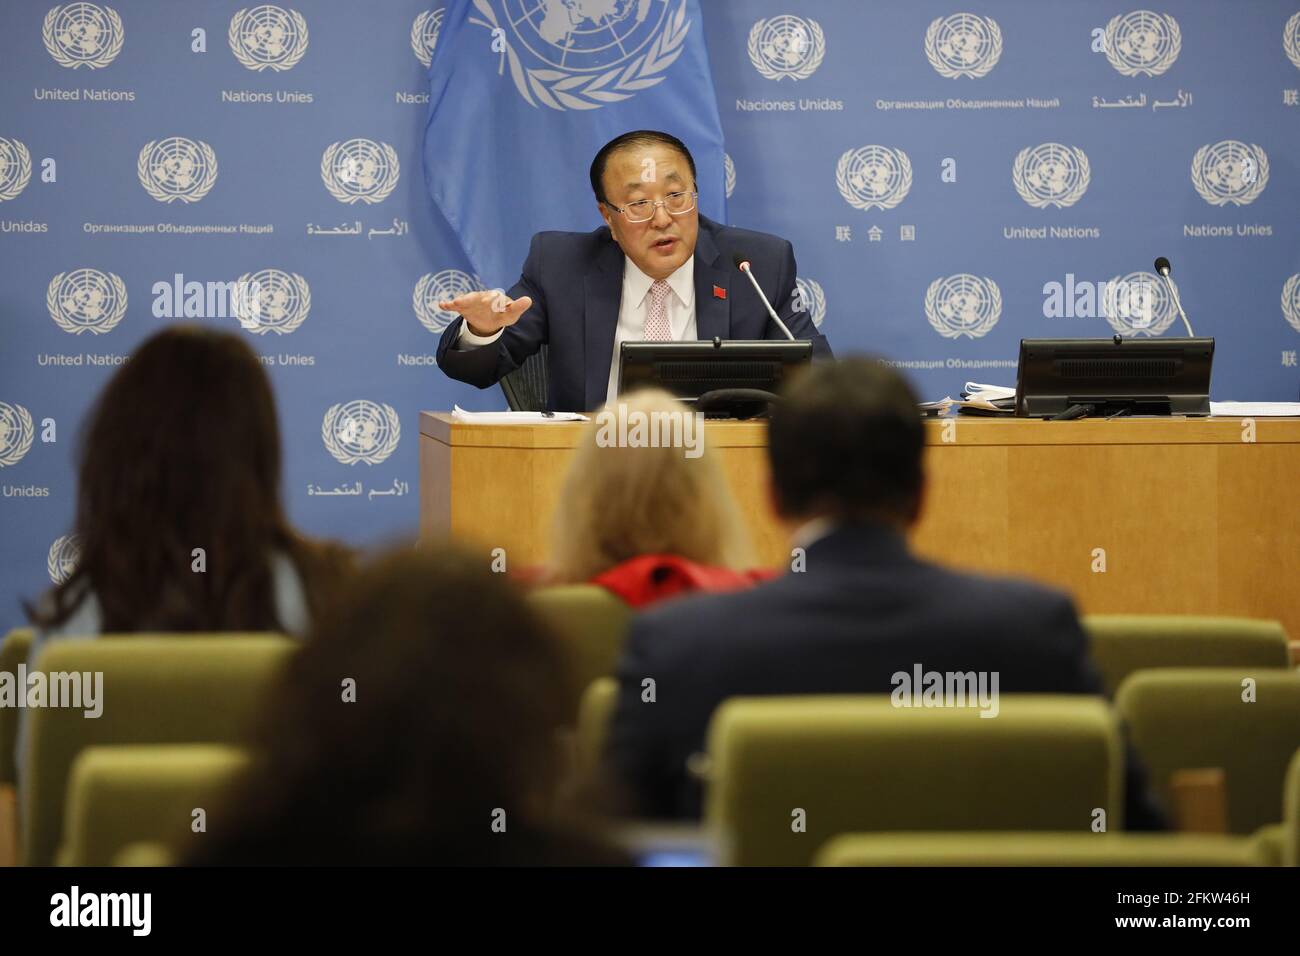 (210504) -- UNITED NATIONS, May 4, 2021 (Xinhua) -- Chinese Ambassador to the United Nations (UN) Zhang Jun speaks during a press conference at the UN headquarters in New York, the United States, May 3, 2021. Zhang Jun, who took the rotating presidency of the Security Council, on Monday underlined the importance of practicing true multilateralism.   In his press conference on China's presidency for the month of May, Zhang told journalists that based on the Council's agenda, China will take the following as priorities in the work of the Security Council, including firmly upholding and practicin Stock Photo